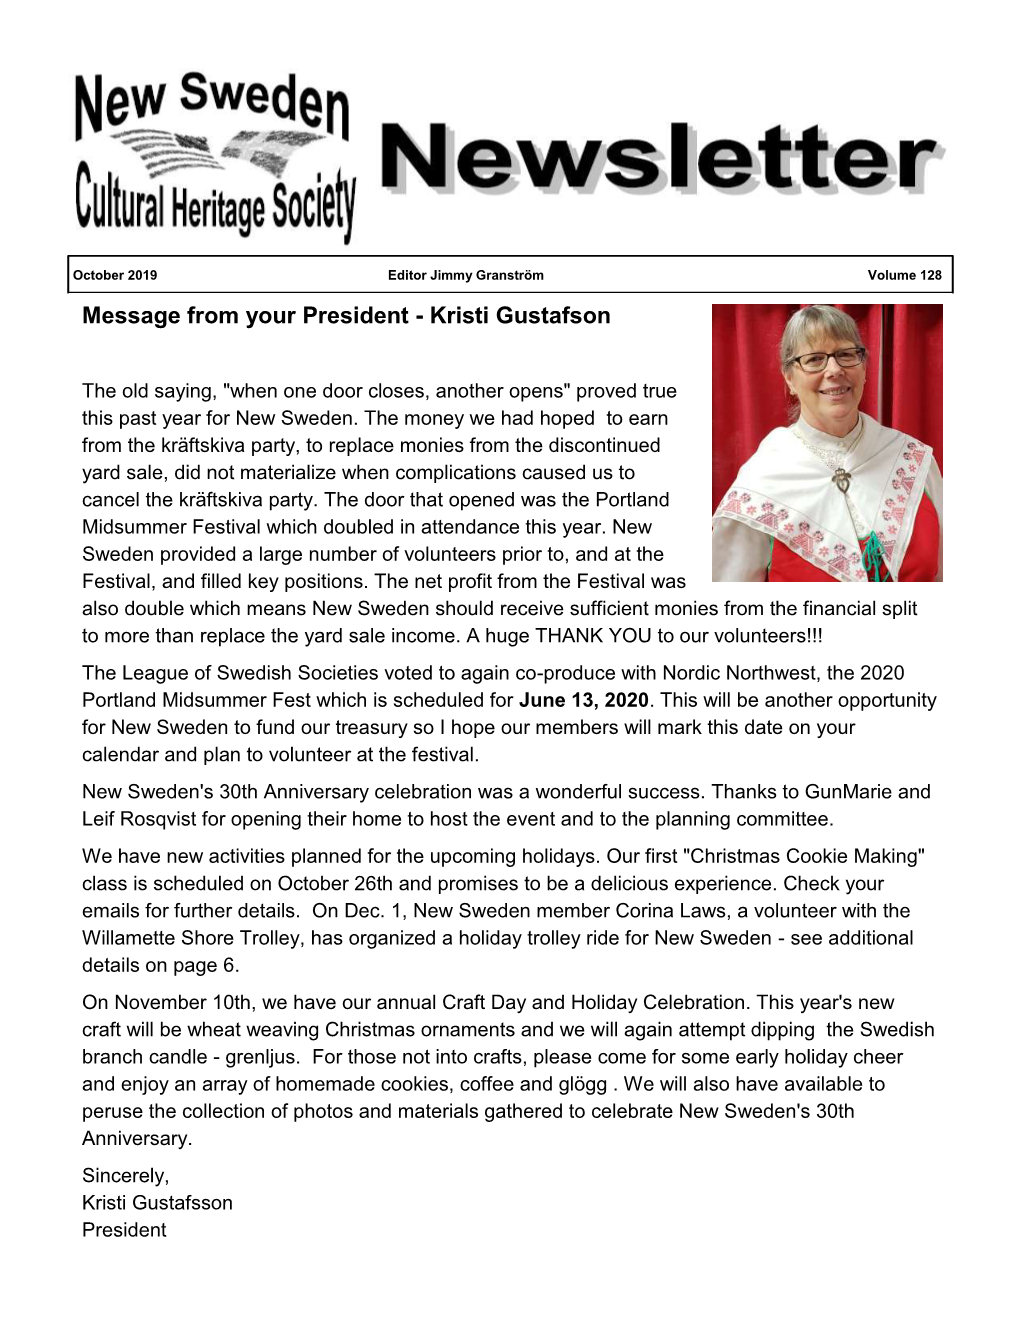 Message from Your President - Kristi Gustafson